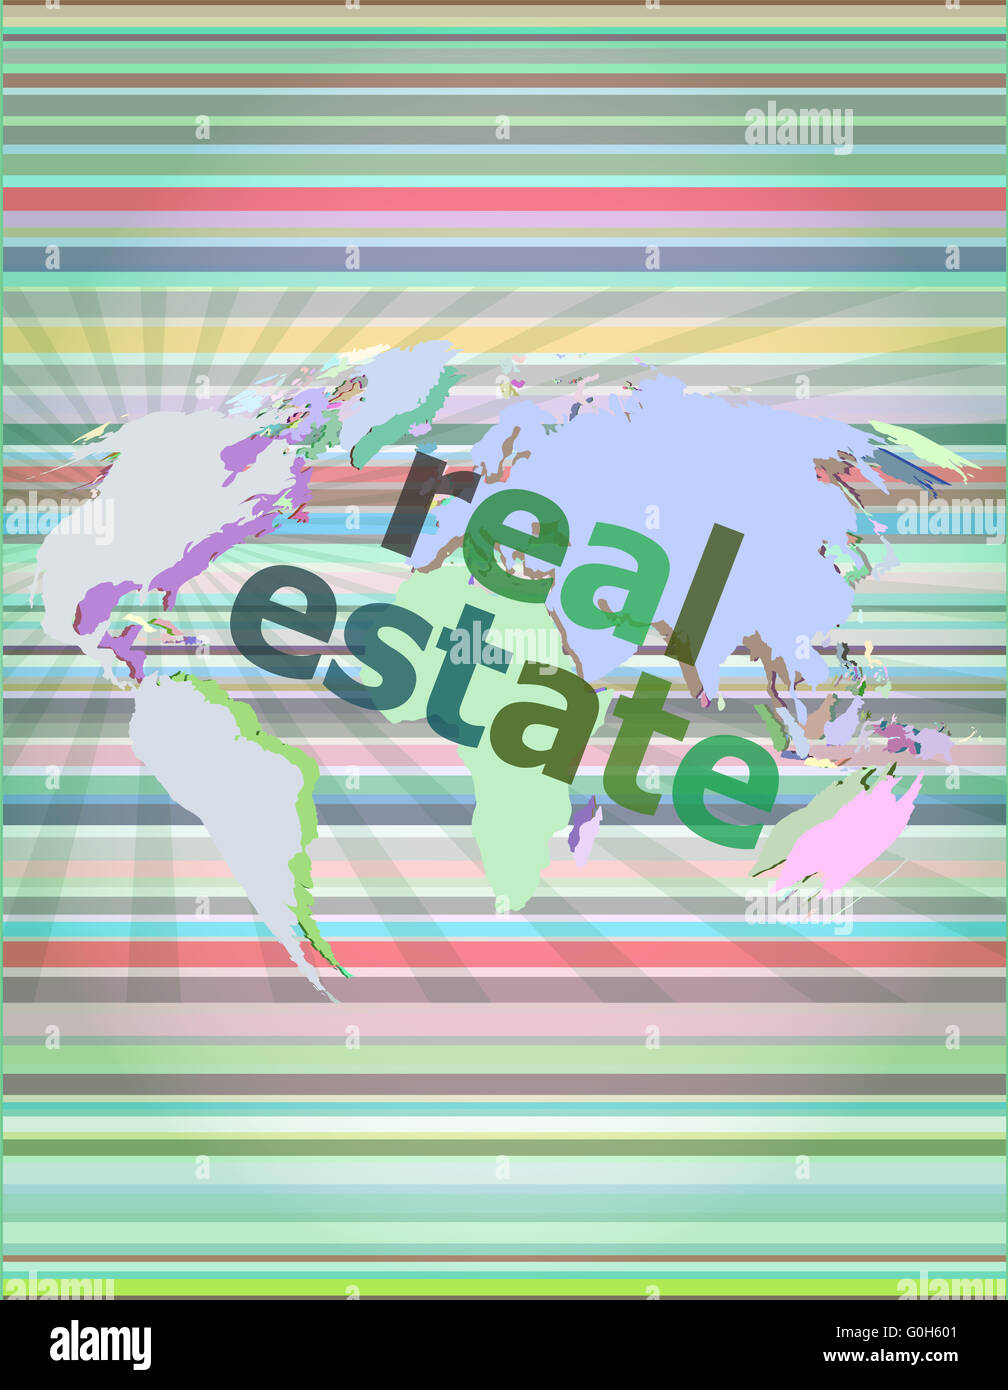 real estate text on touch screen vector illustration Stock Photo